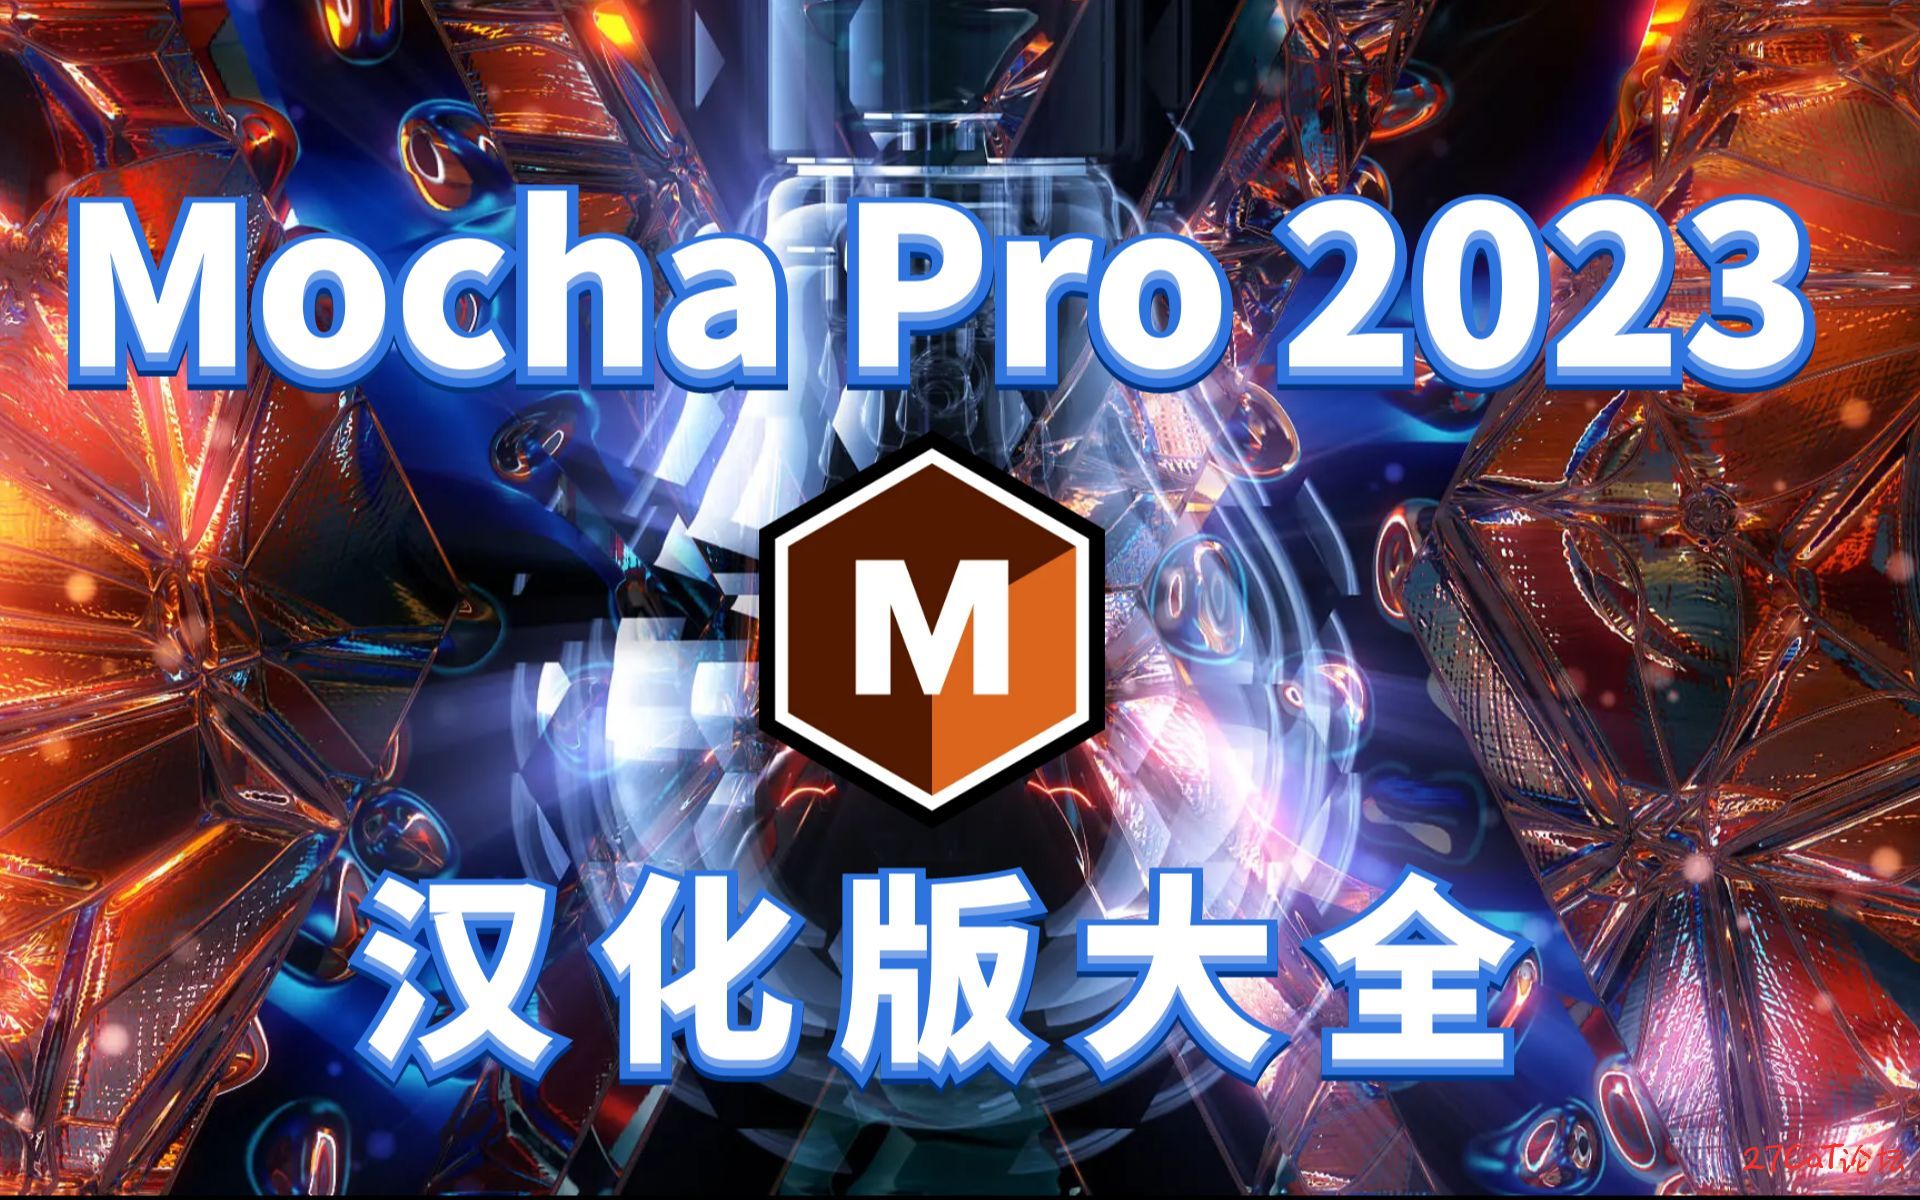 download the new version for ipod Mocha Pro 2023 v10.0.3.15